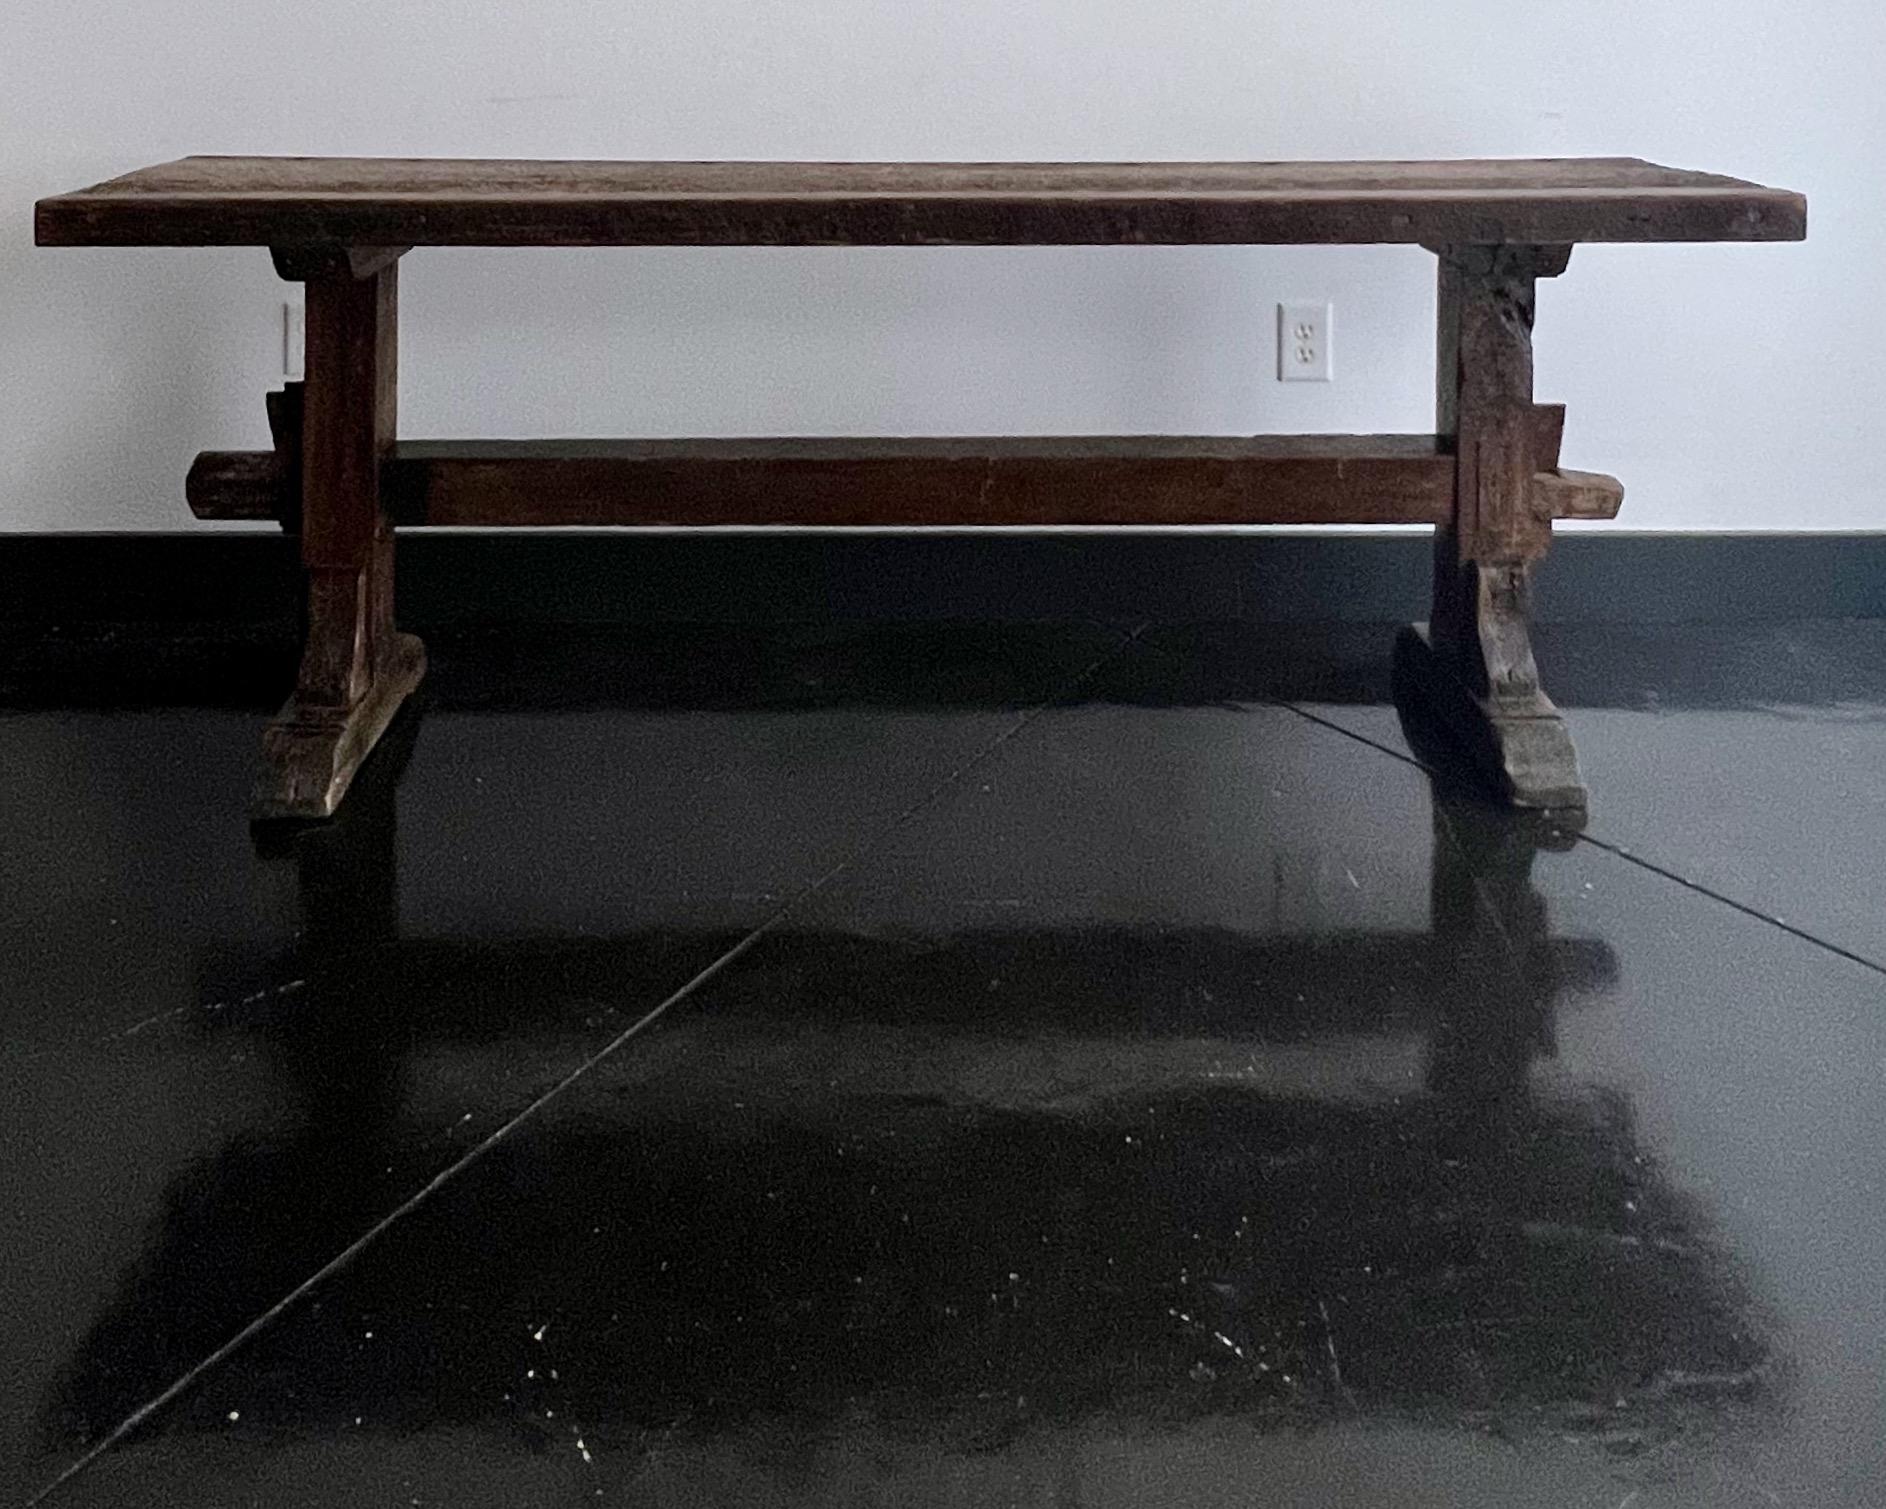 19th century French carpenter's workbench in timeworn patinated oak with very thick top with ten tool holes, traditional trestle legs - tenon and mortise construction.
It will be a focal point for use as console, sofa table or bar.
The table comes